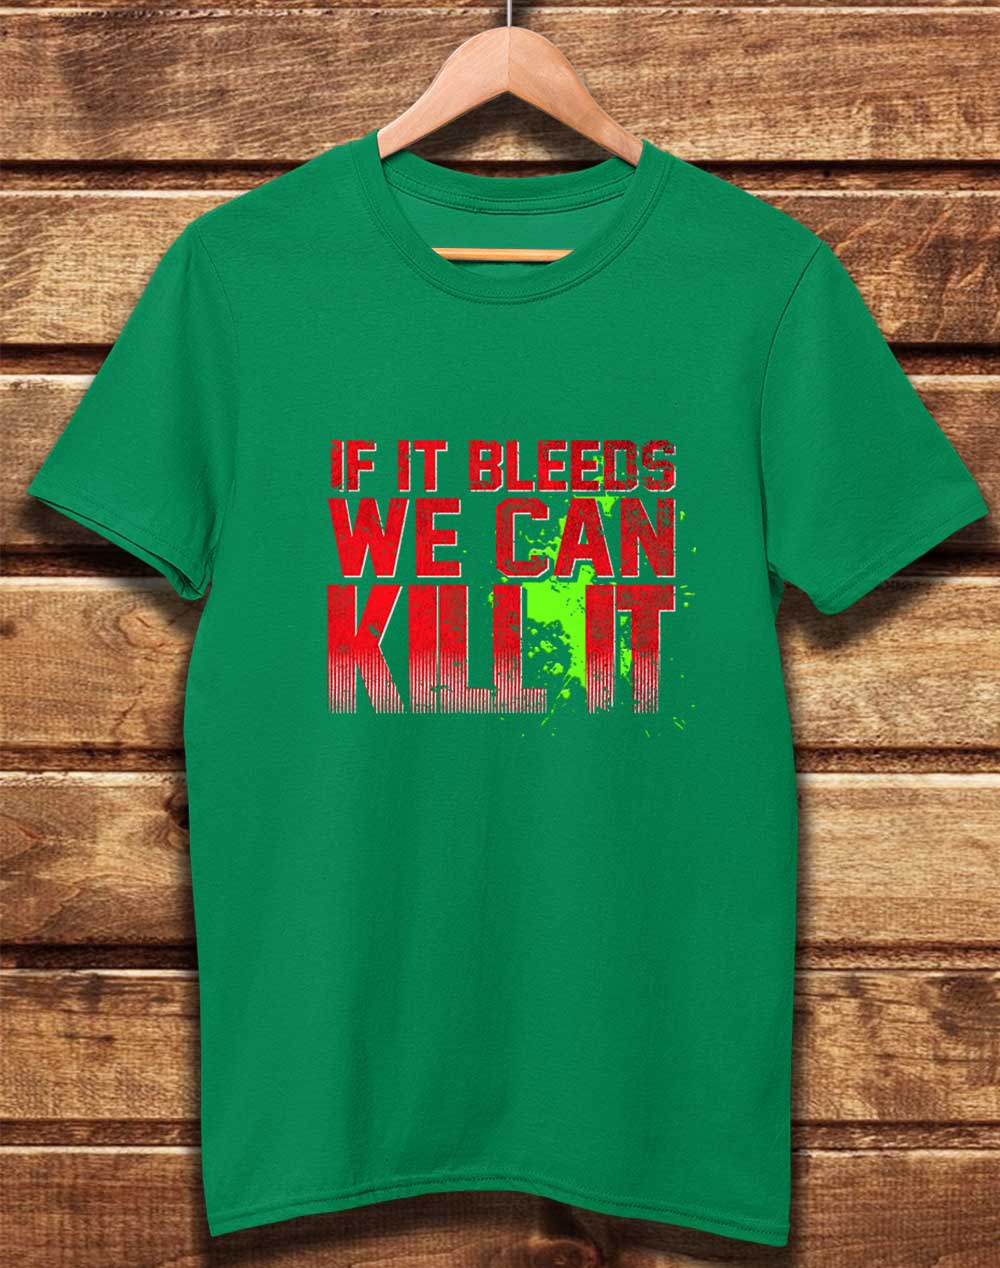 Kelly Green - DELUXE If It Bleeds We Can Kill It Organic Cotton T-Shirt